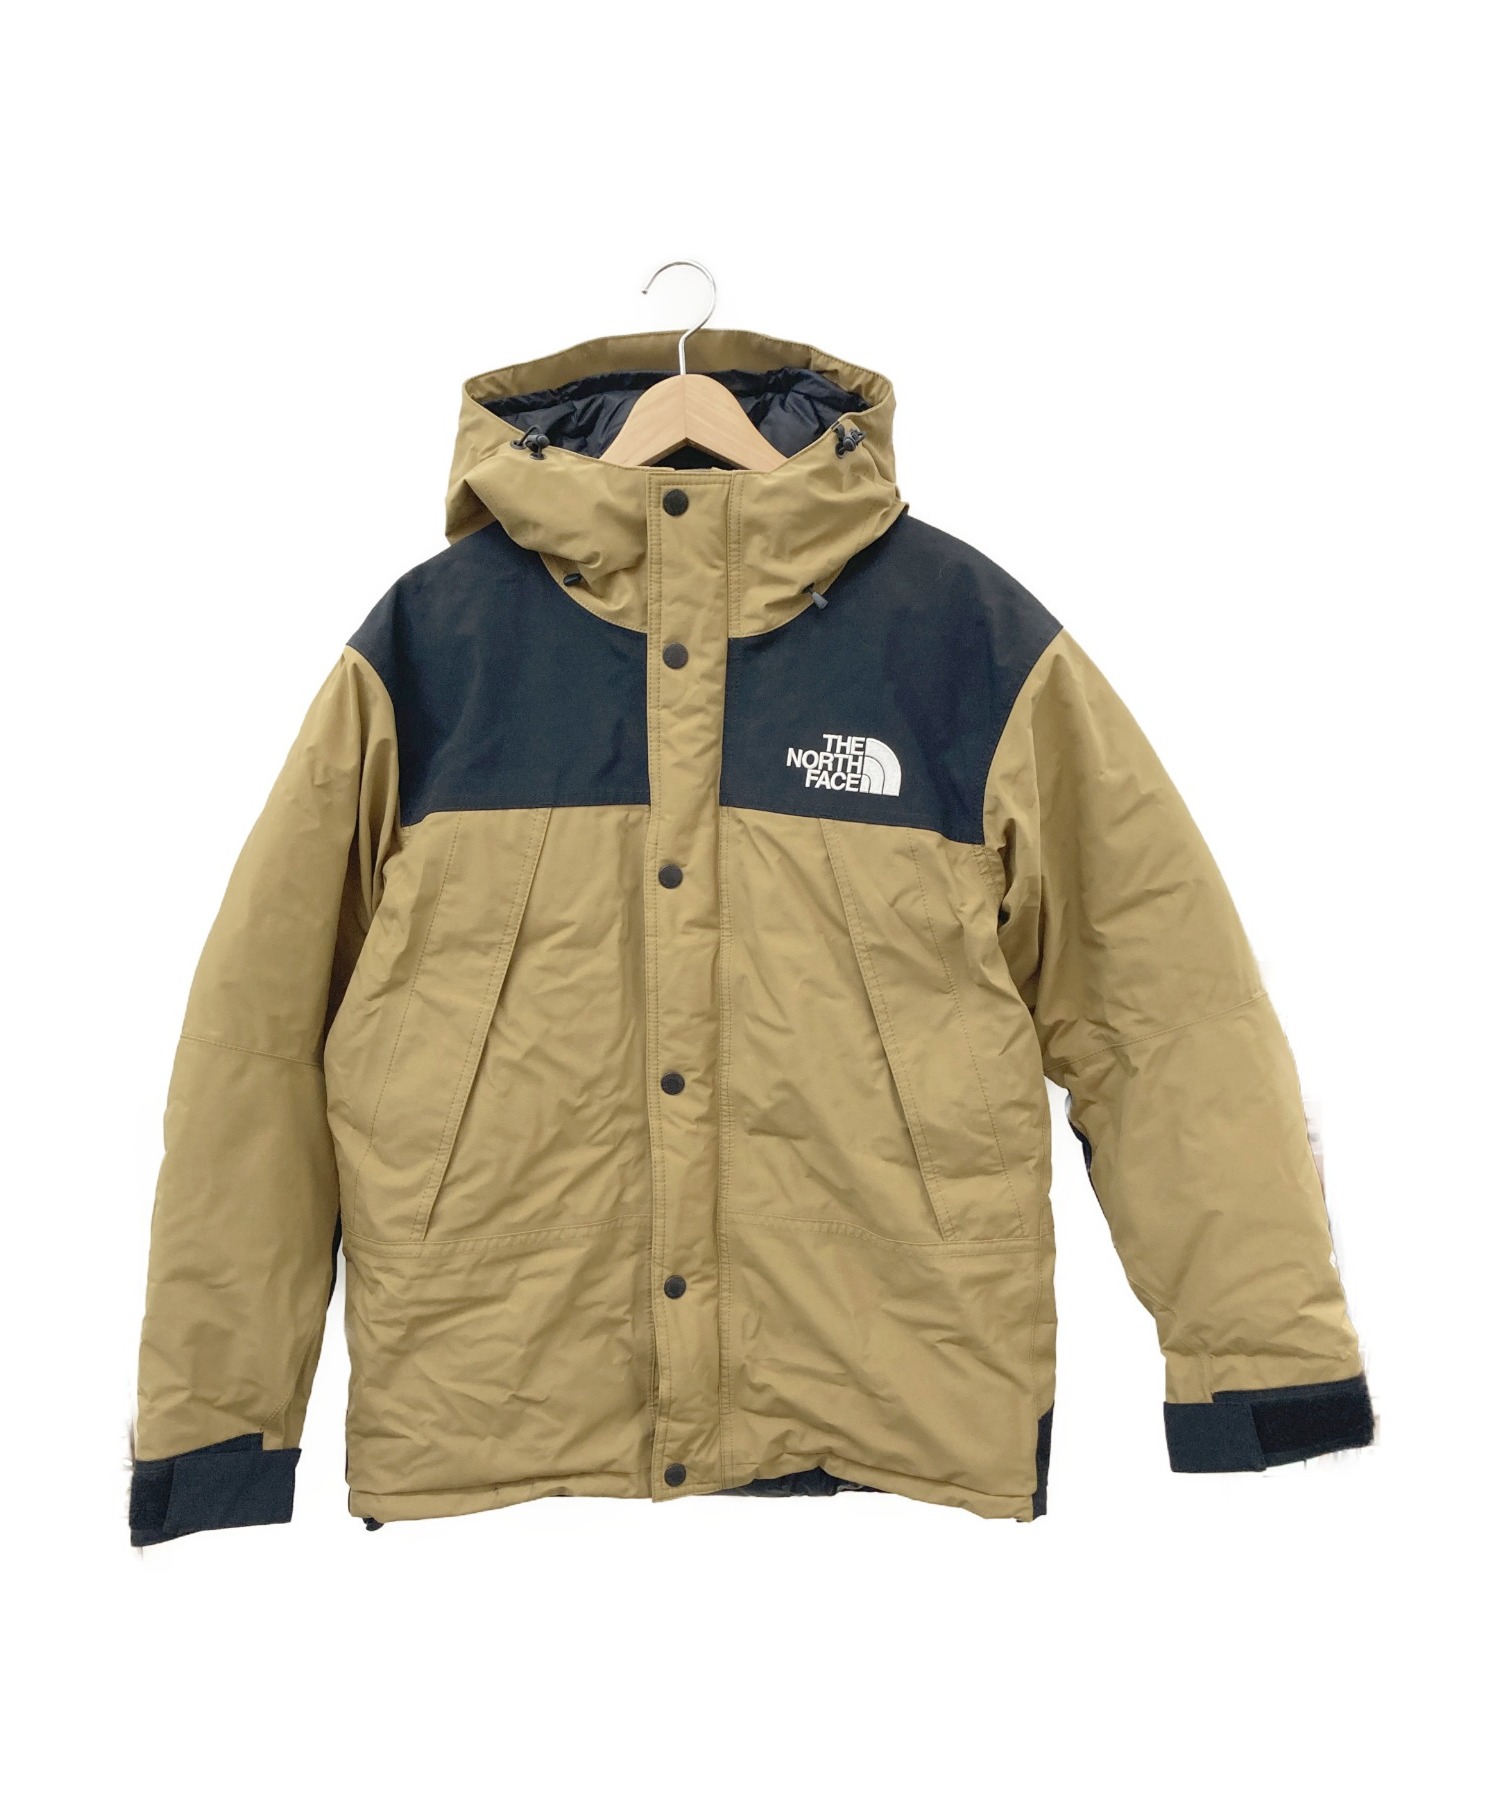 THE NORTH FACE 下降ジャケツ 中古 - whirledpies.com